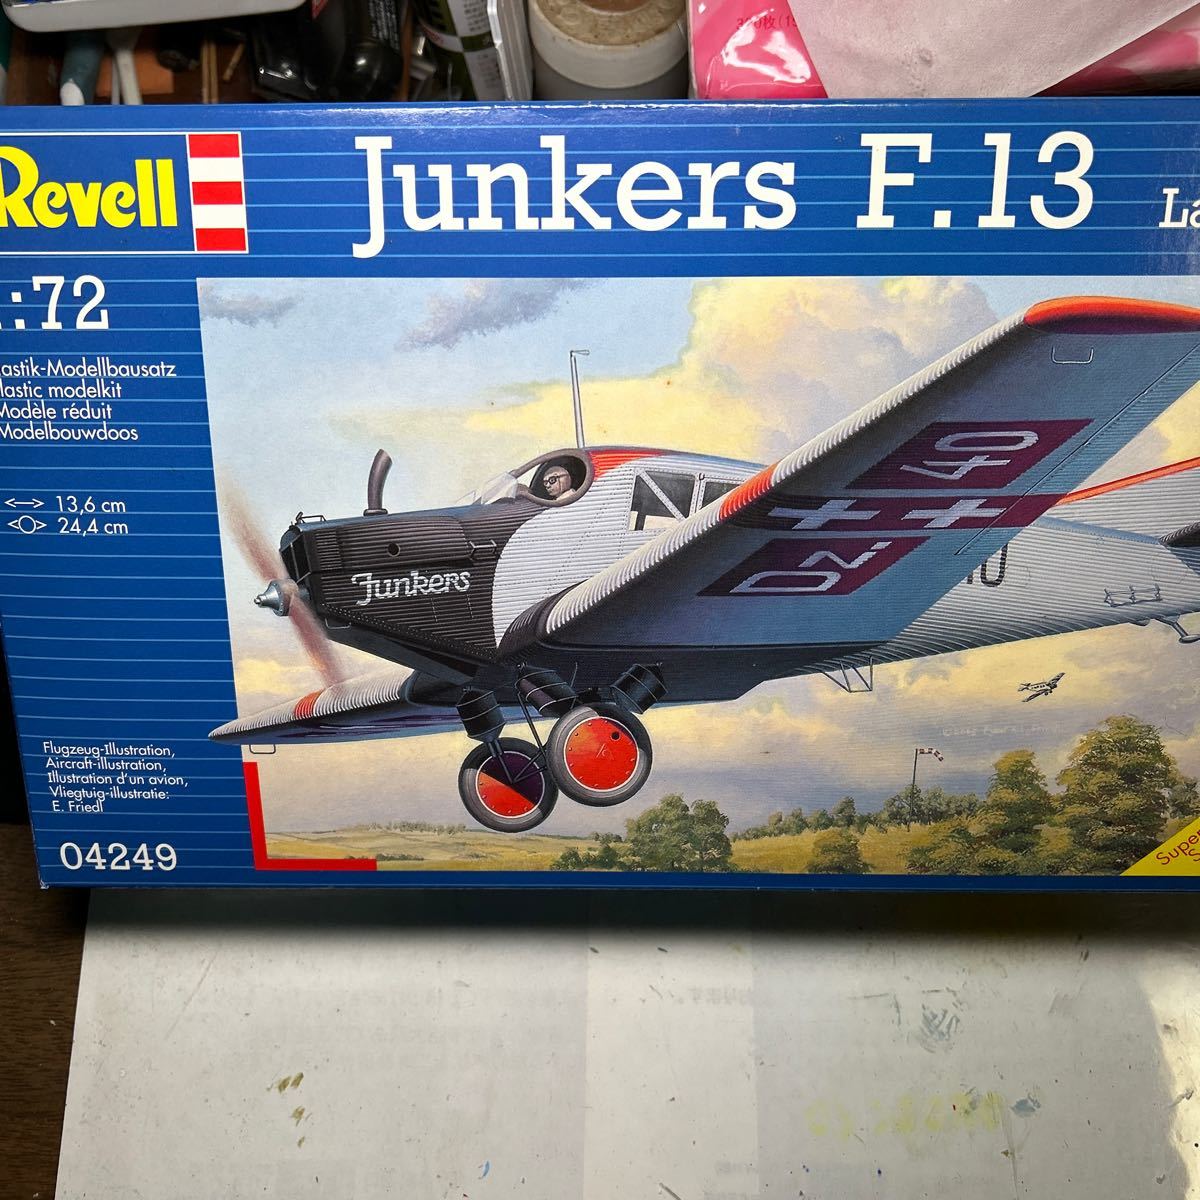 yun car sJunkers F.13 1/72 Revell land / water 